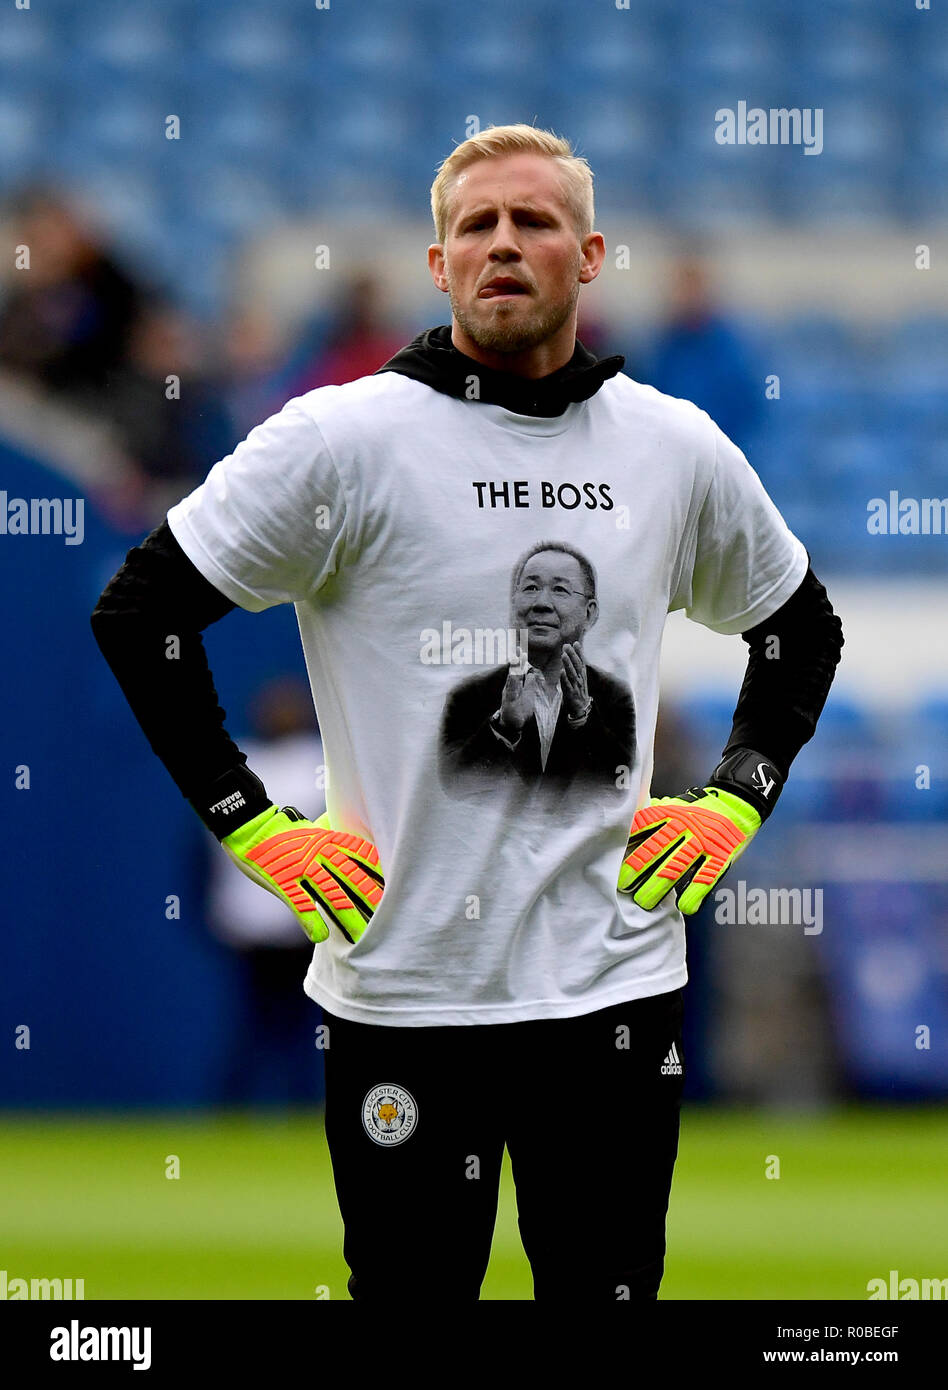 Leicester City goalkeeper Kasper Schmeichel wears a Vichai  Srivaddhanaprabha shirt that reads 'The Boss' during warm-up the Premier  League match at the Cardiff City Stadium, Cardiff Stock Photo - Alamy